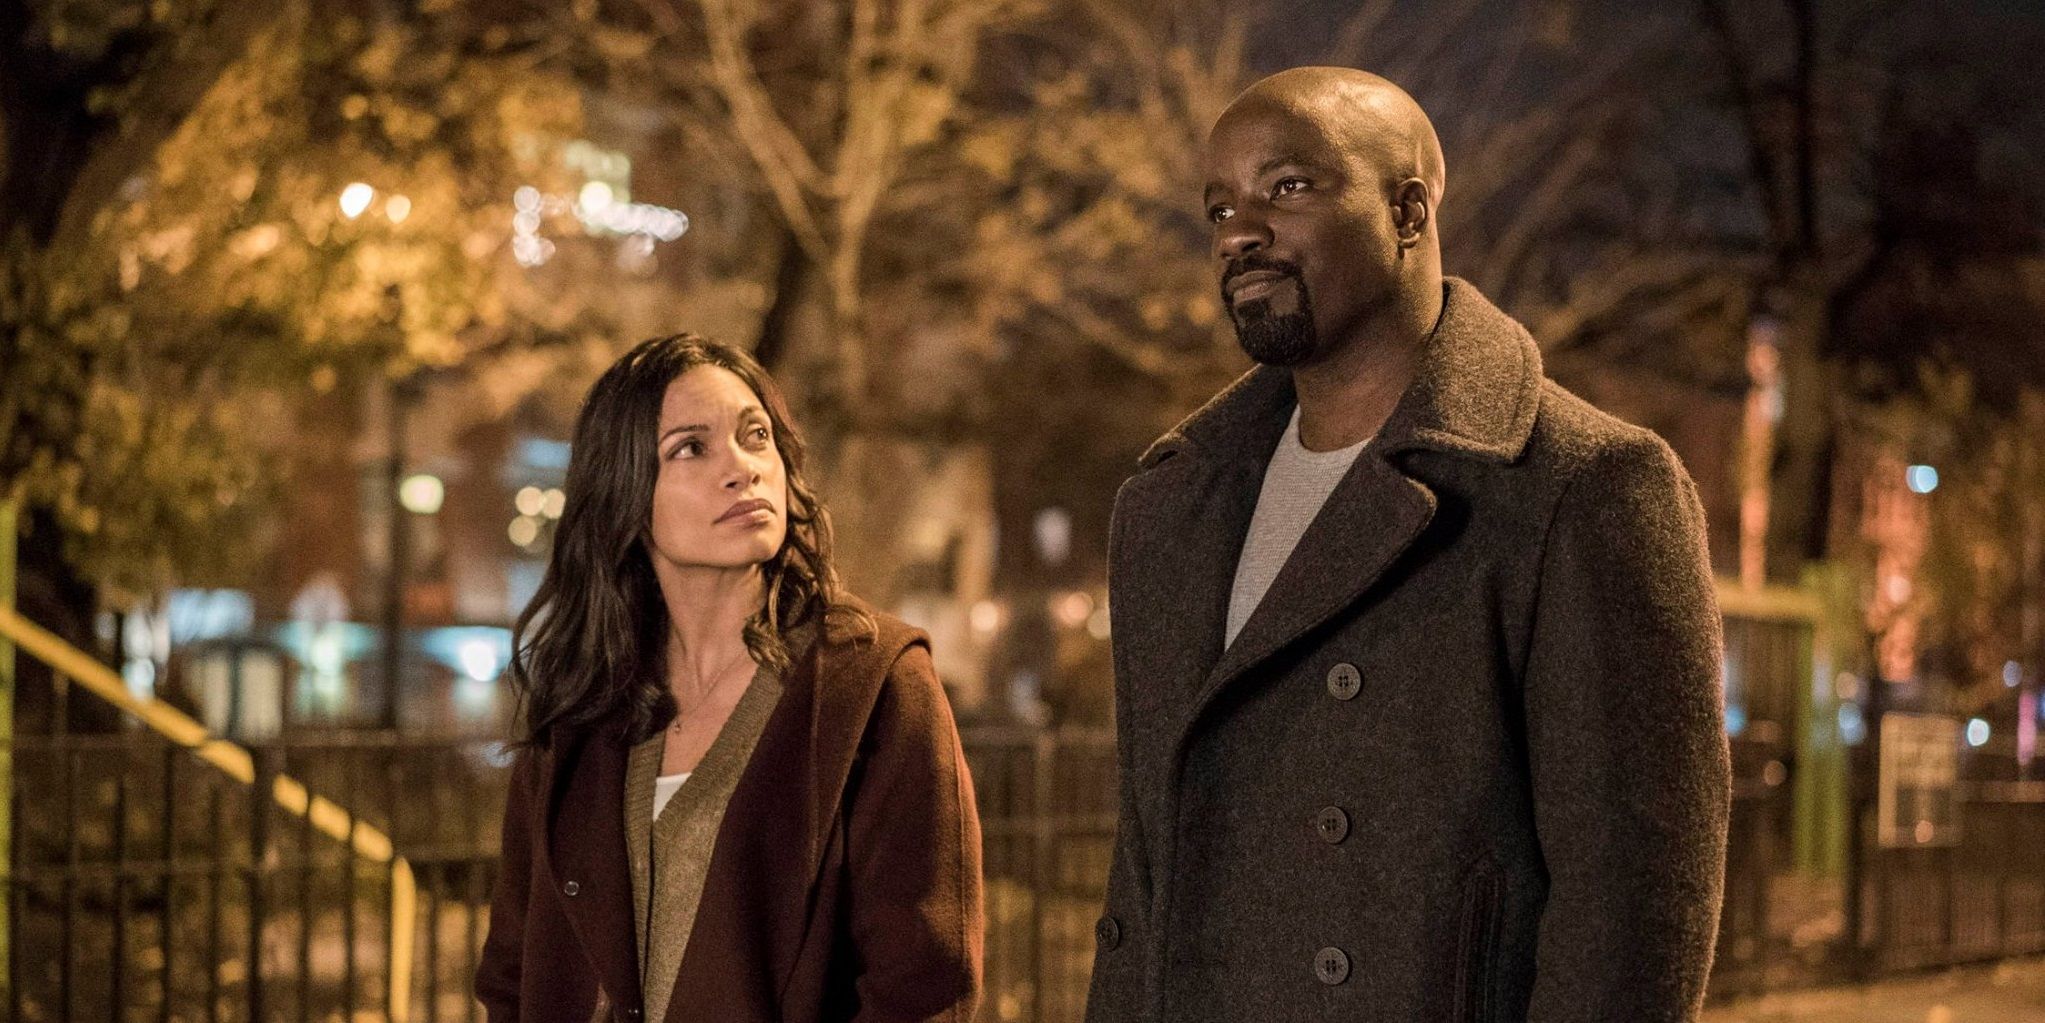 Rosario Dawson and Mike Colter as Claire Temple and Luke Cage